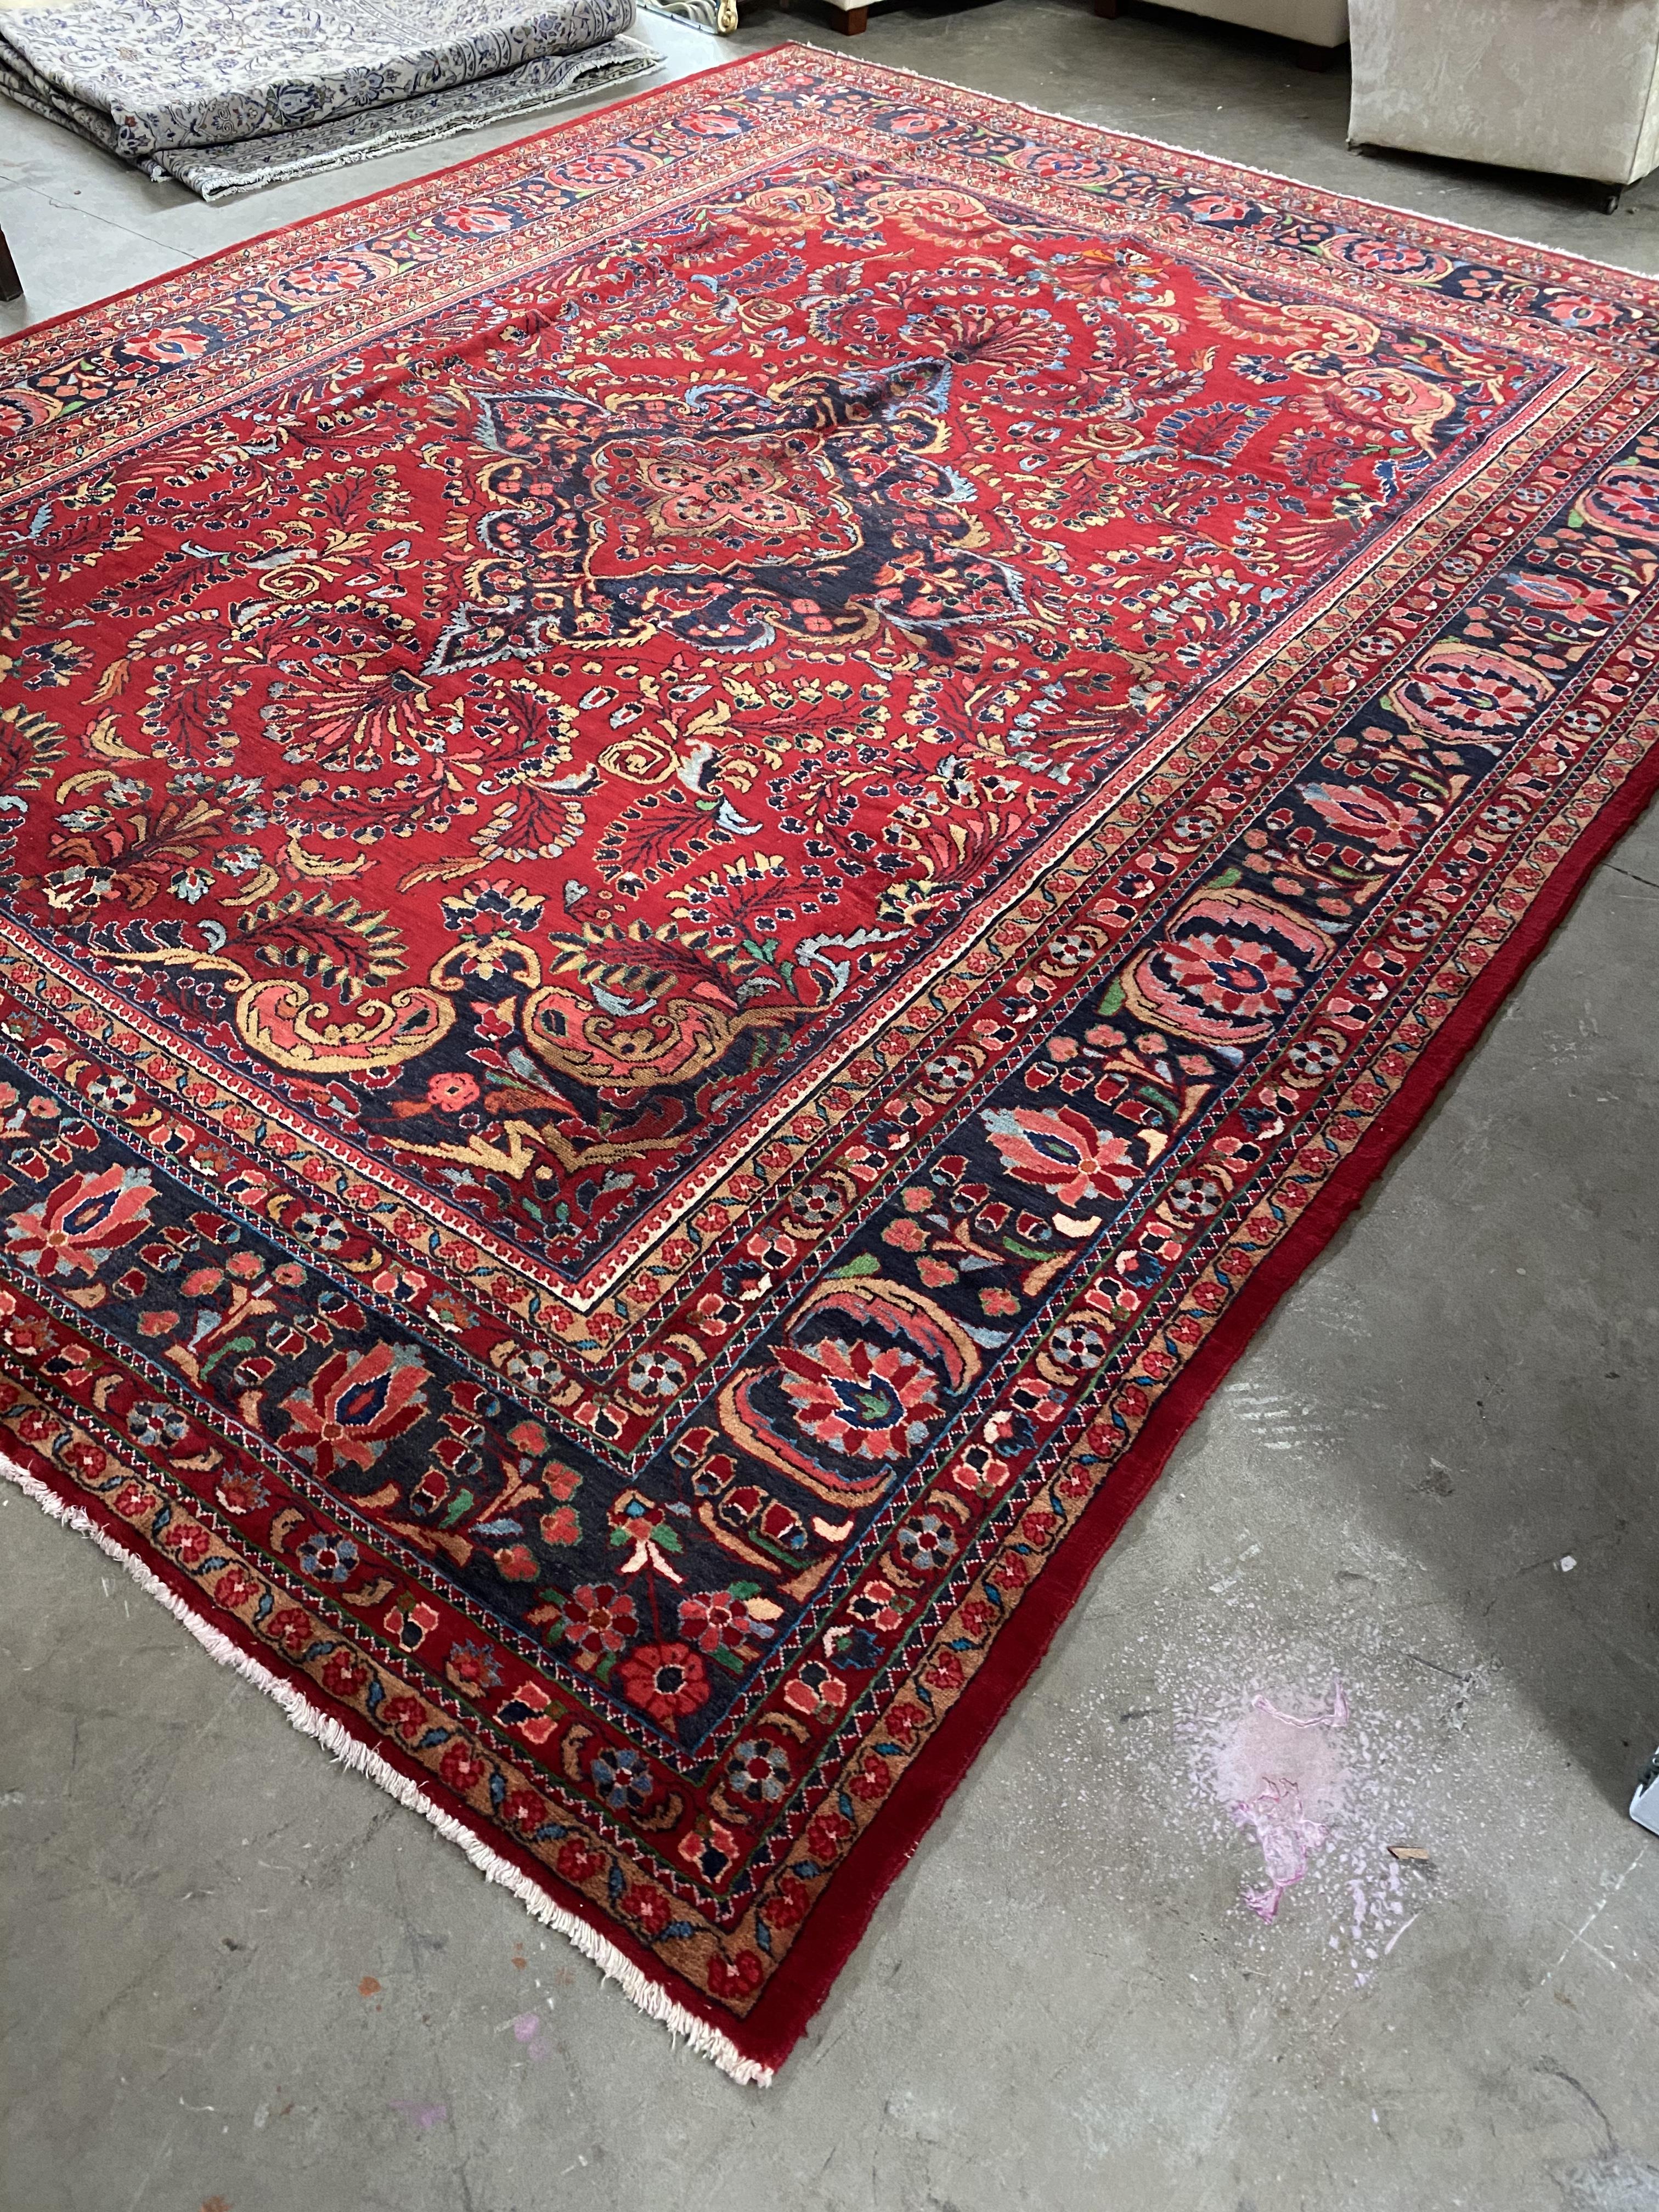 A MID-20TH CENTURY HAND-KNOTTED PERSIAN CARPET - Image 2 of 2